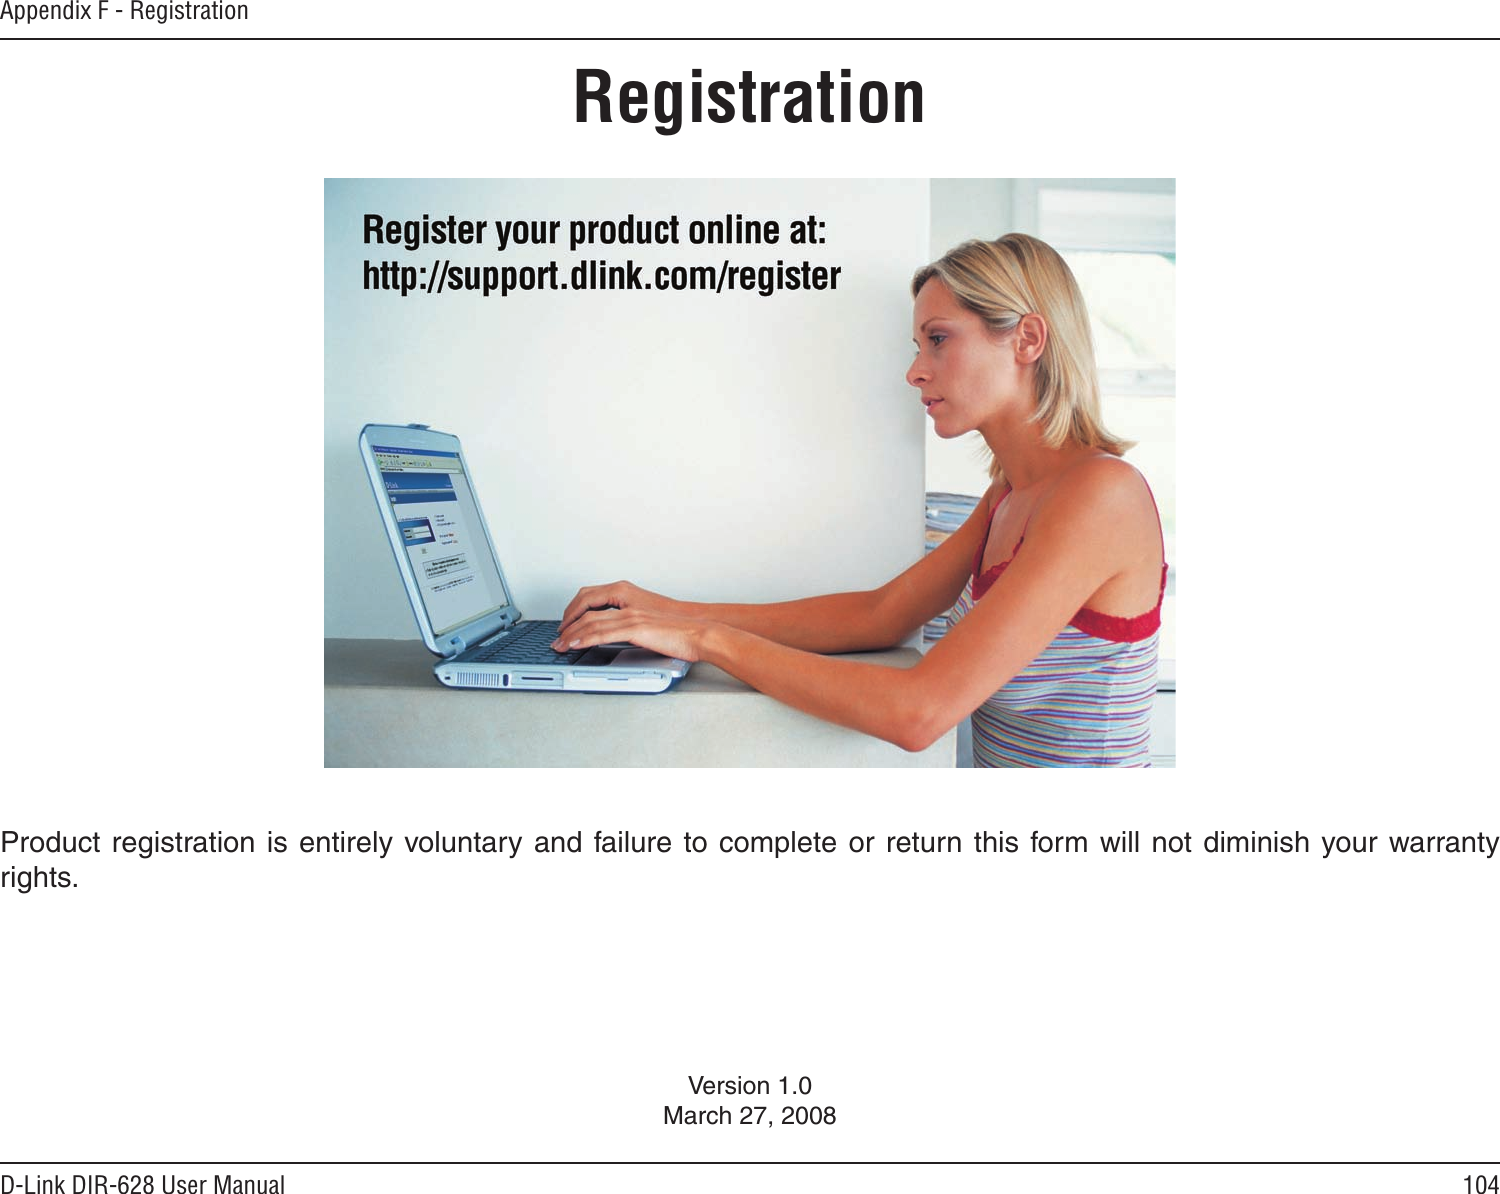 104D-Link DIR-628 User ManualAppendix F - RegistrationVersion 1.0March 27, 2008Product registration is entirely voluntary and failure to complete or return  this form  will not diminish your warranty rights.Registration